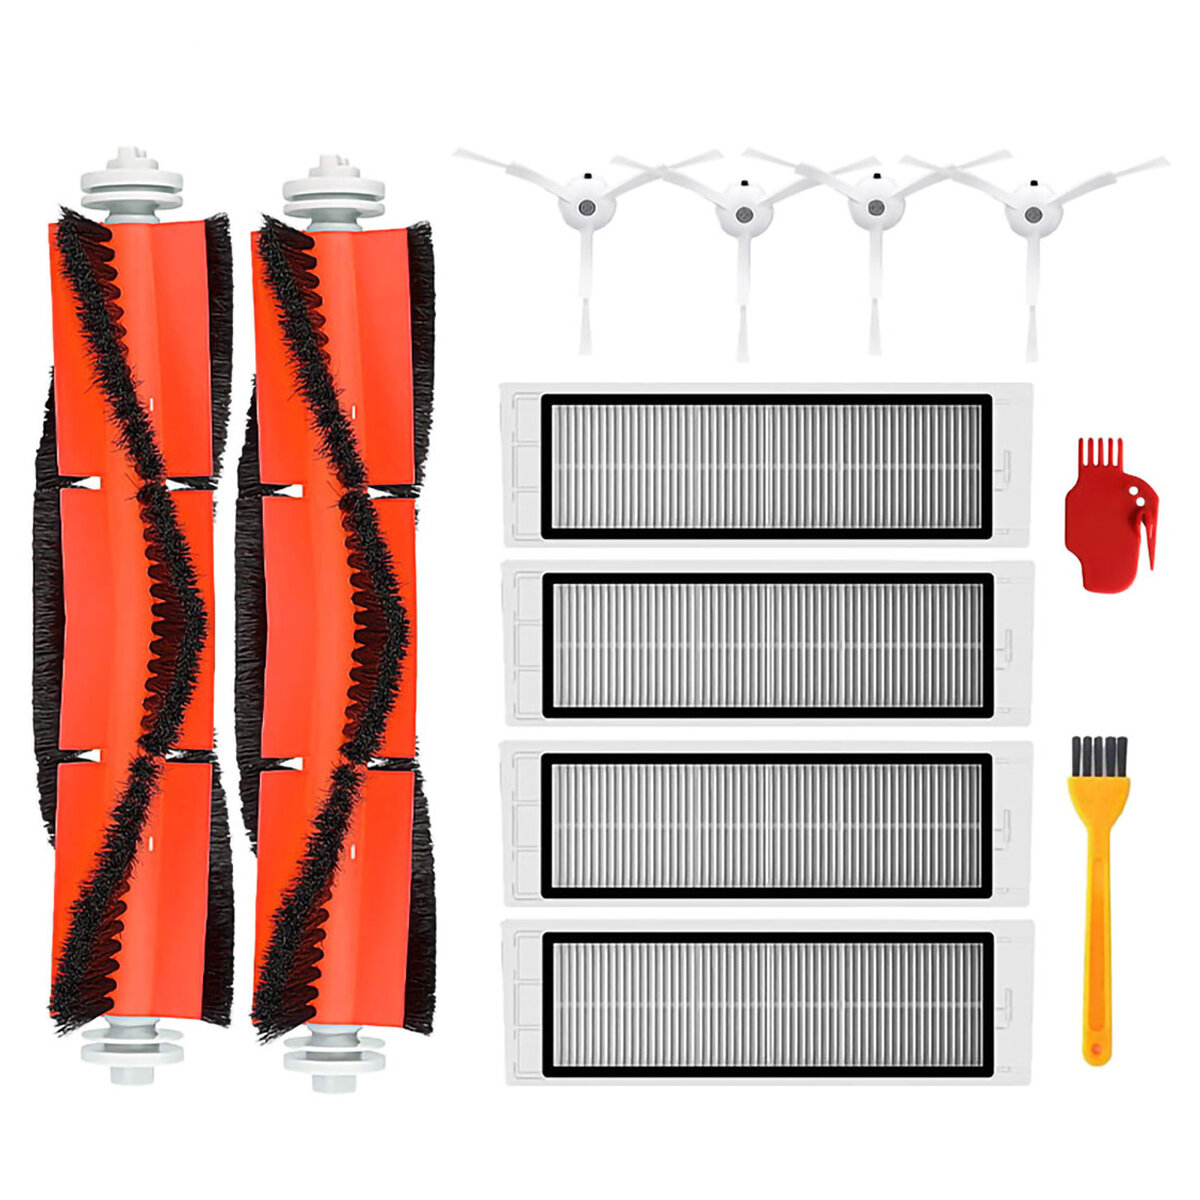 12pcs Replacements for Xiaomi Roborock Vacuum Cleaner Parts Accessories Main Brushes*2 Side Brushes*4 HEPA Filters*4 Yel